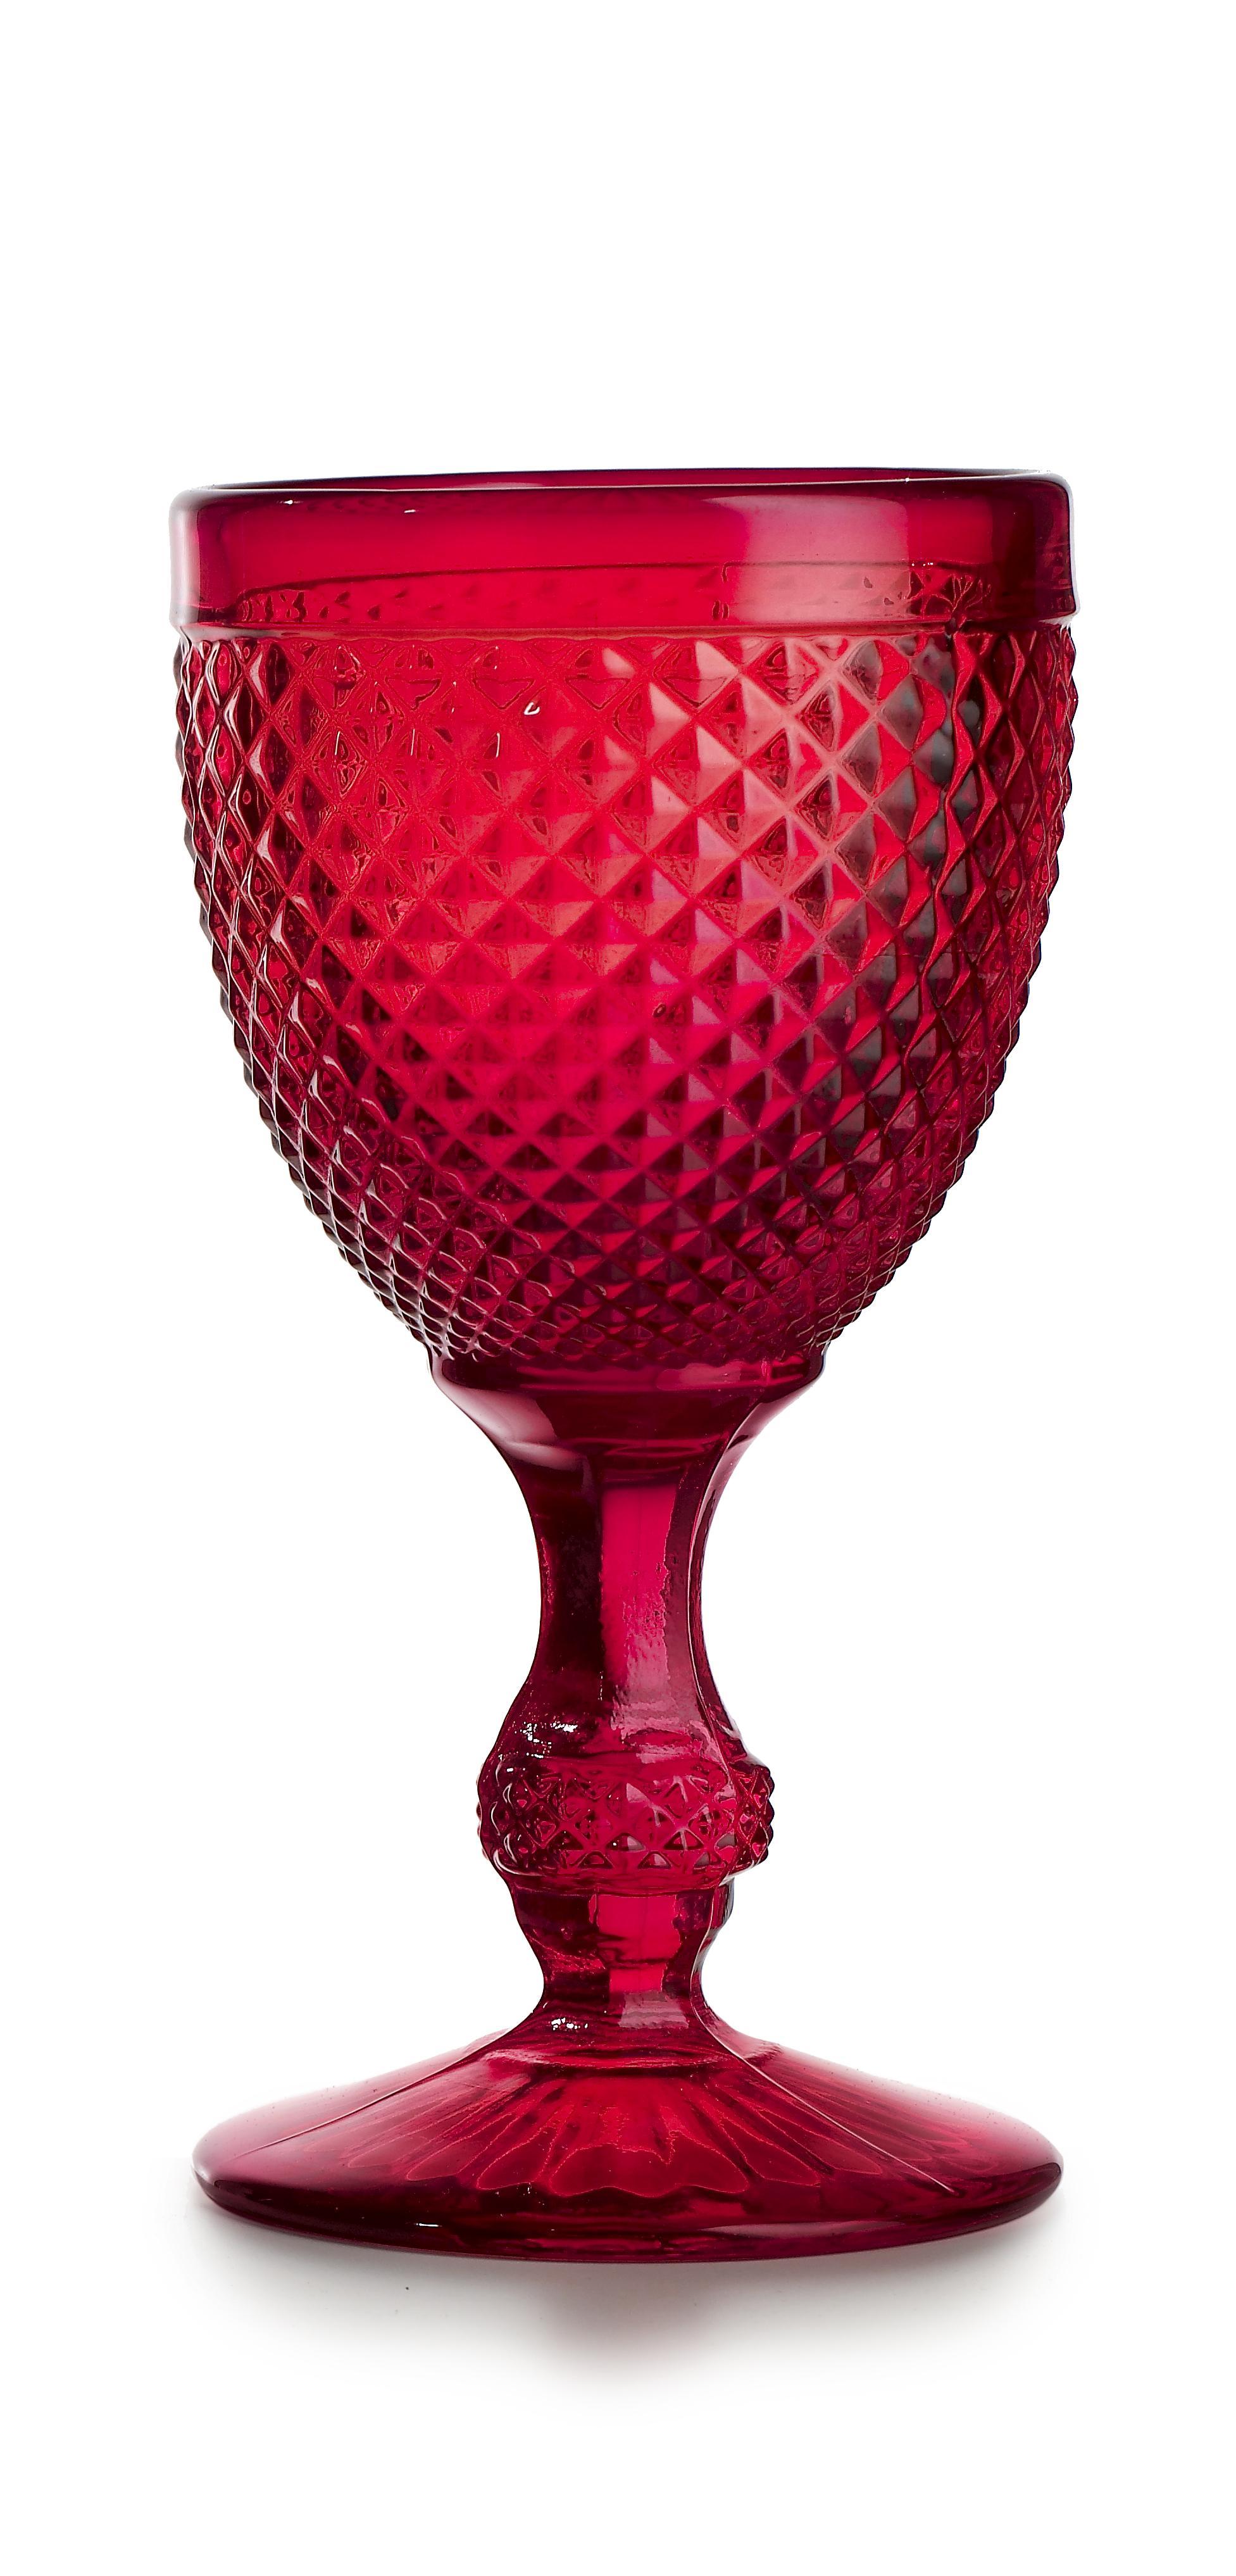 Image of Vista Alegre Red Bicos Water Goblets Set of 4